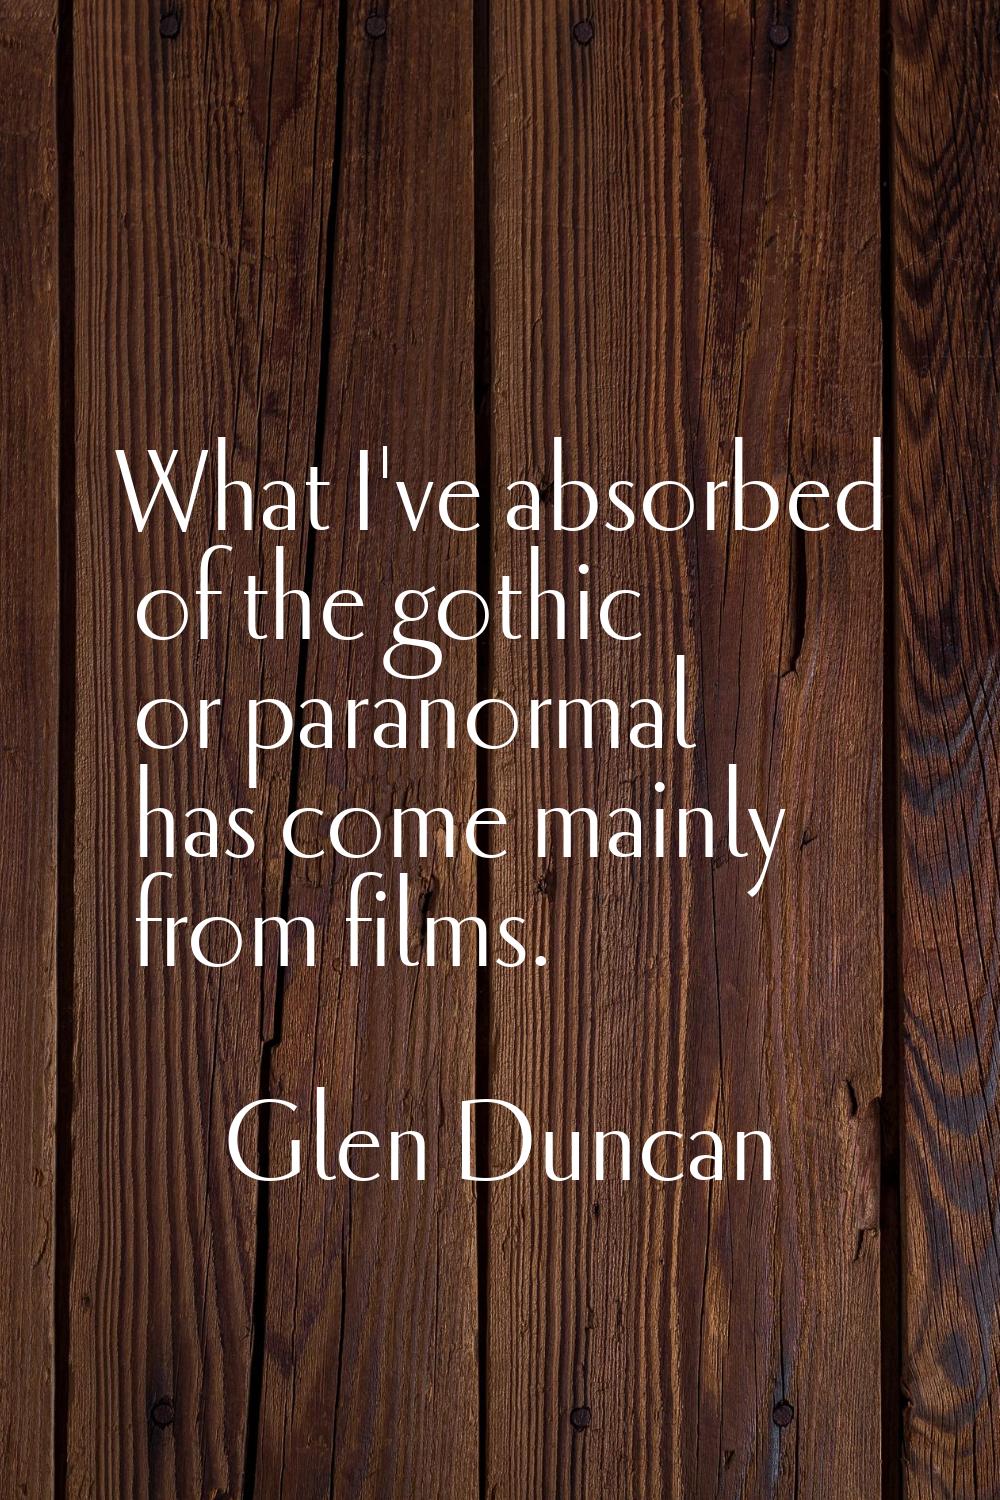 What I've absorbed of the gothic or paranormal has come mainly from films.